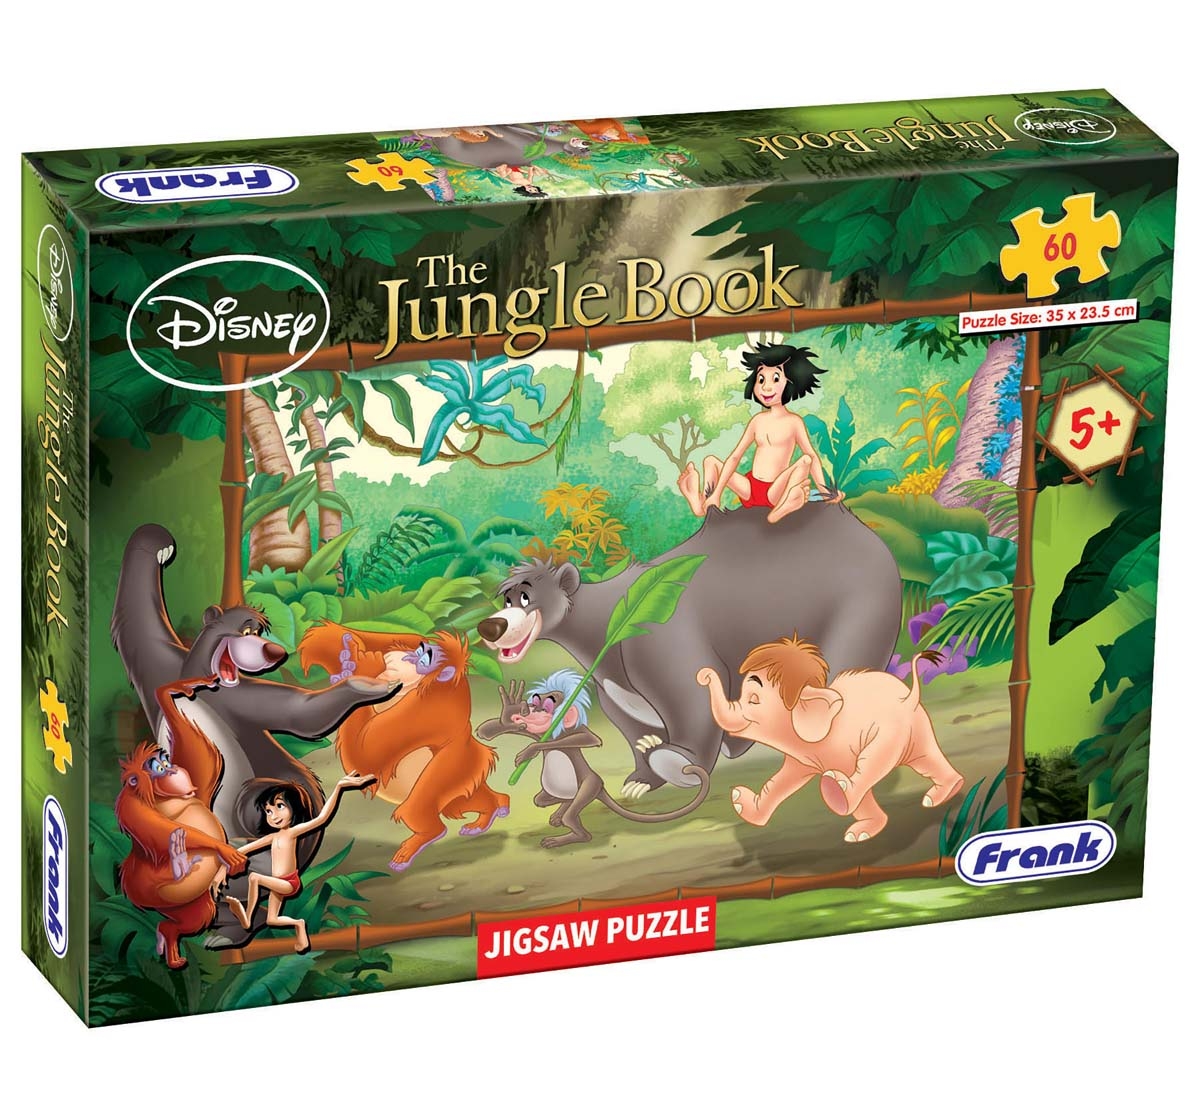 Frank | Frank The Jungle Book 60 Pcs Puzzle Puzzles for Kids Age 5Y+